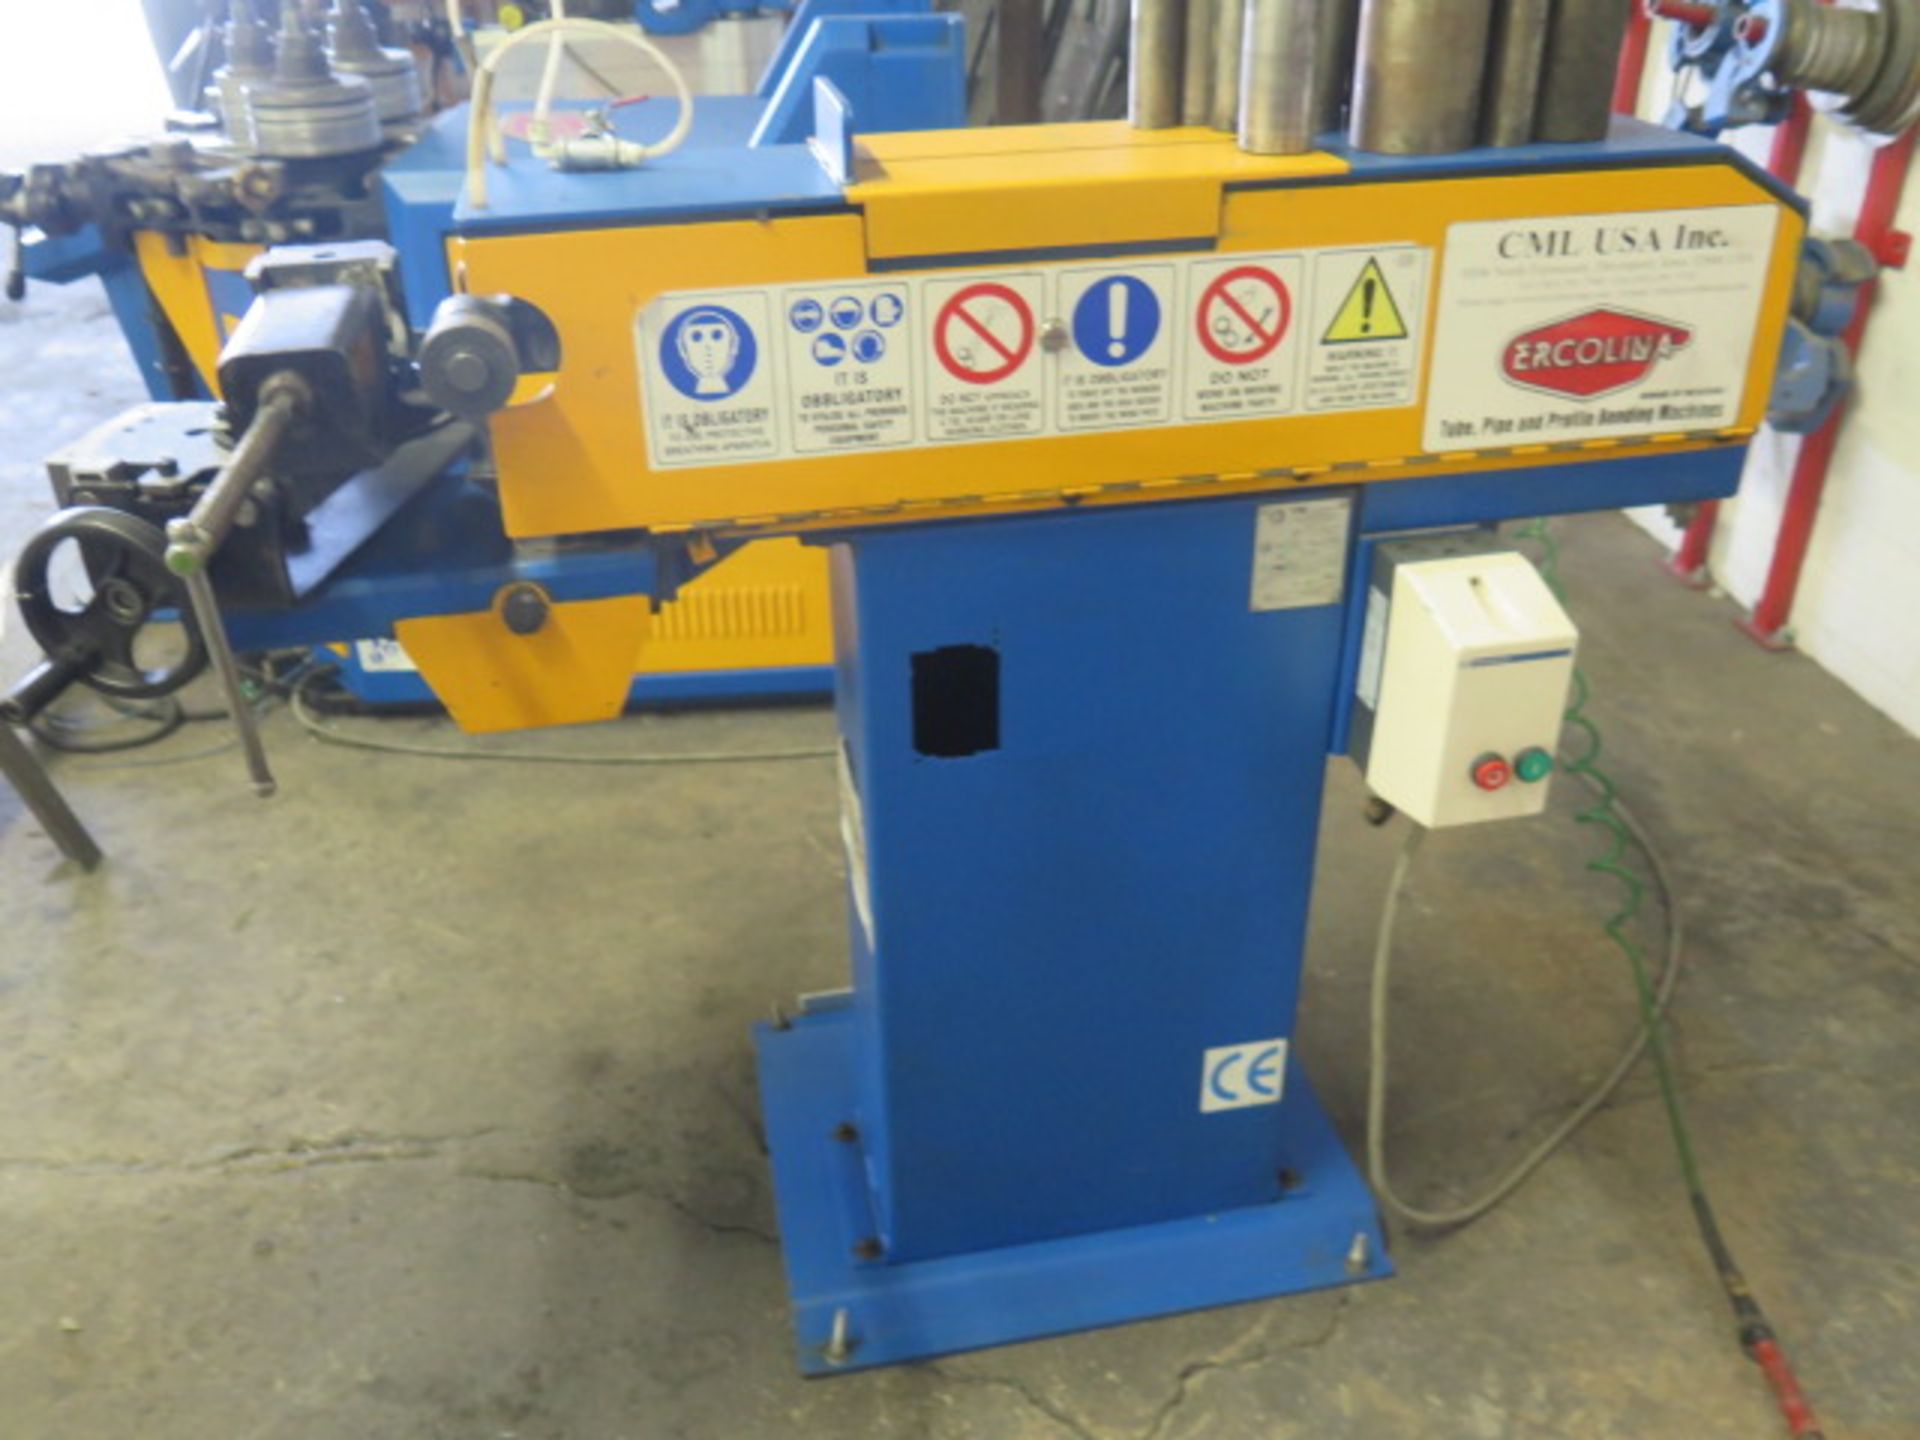 2004 CML / Ercolina Type EN100 Coping Sander s/n 1004046 w/ 5" Belt Cap, Manual Clamping, Compound - Image 2 of 8